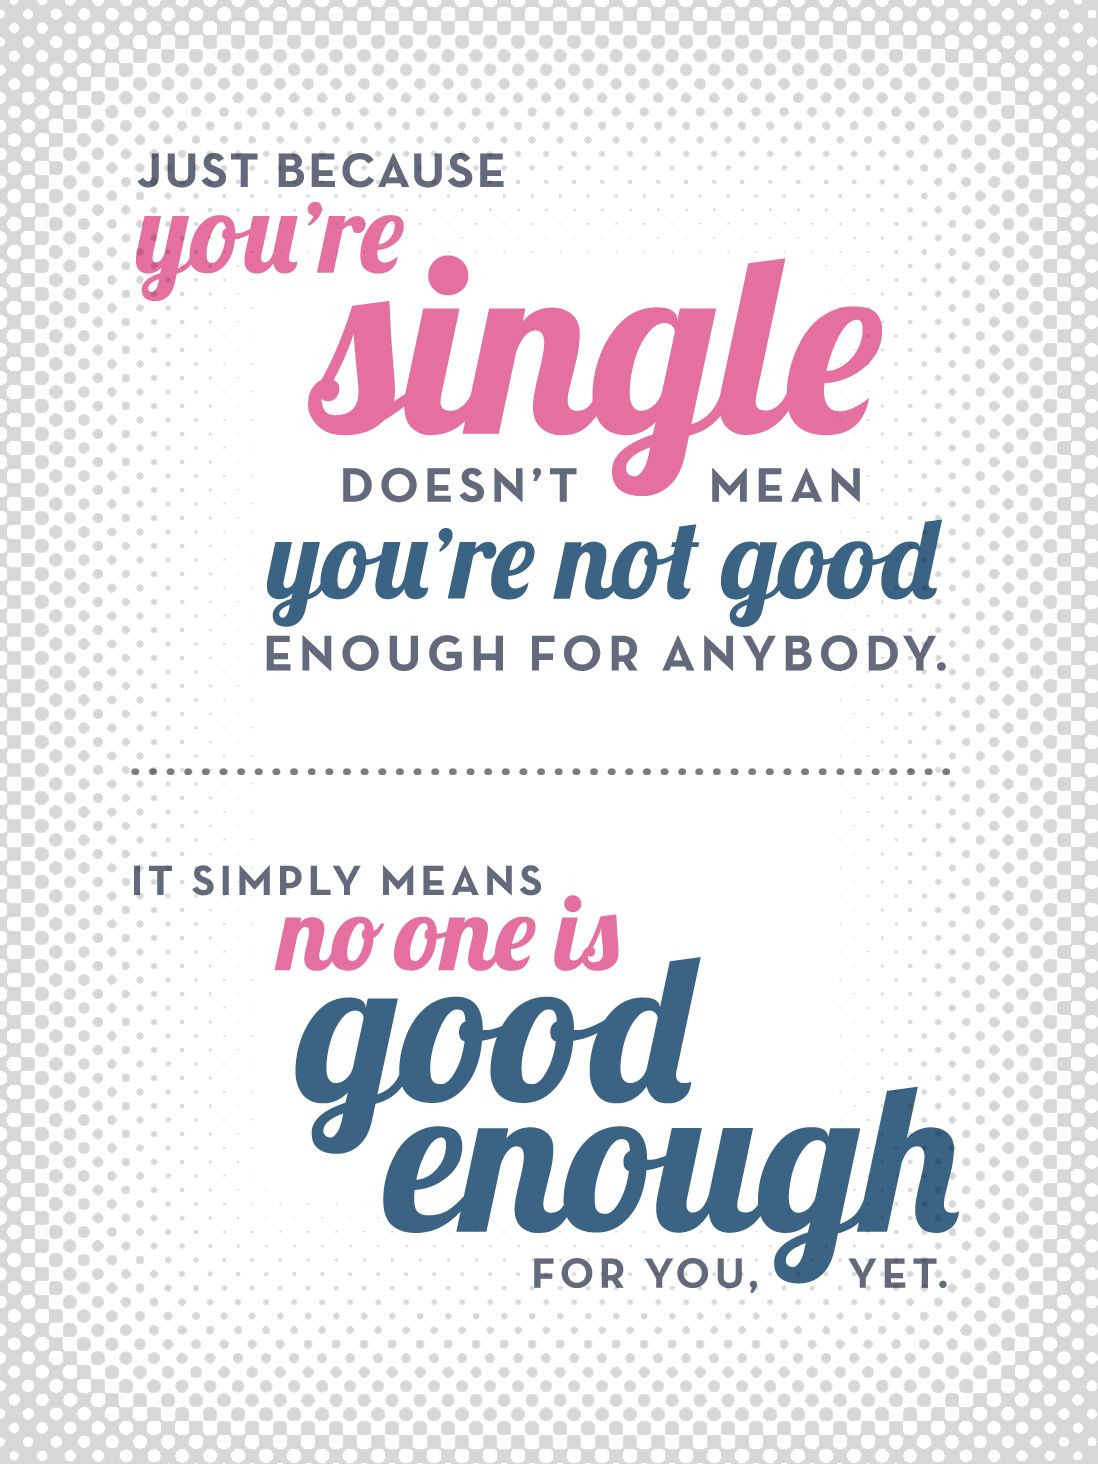 Funny Single Valentines Day Quotes
 Happy Valentines Day to all the singles out there